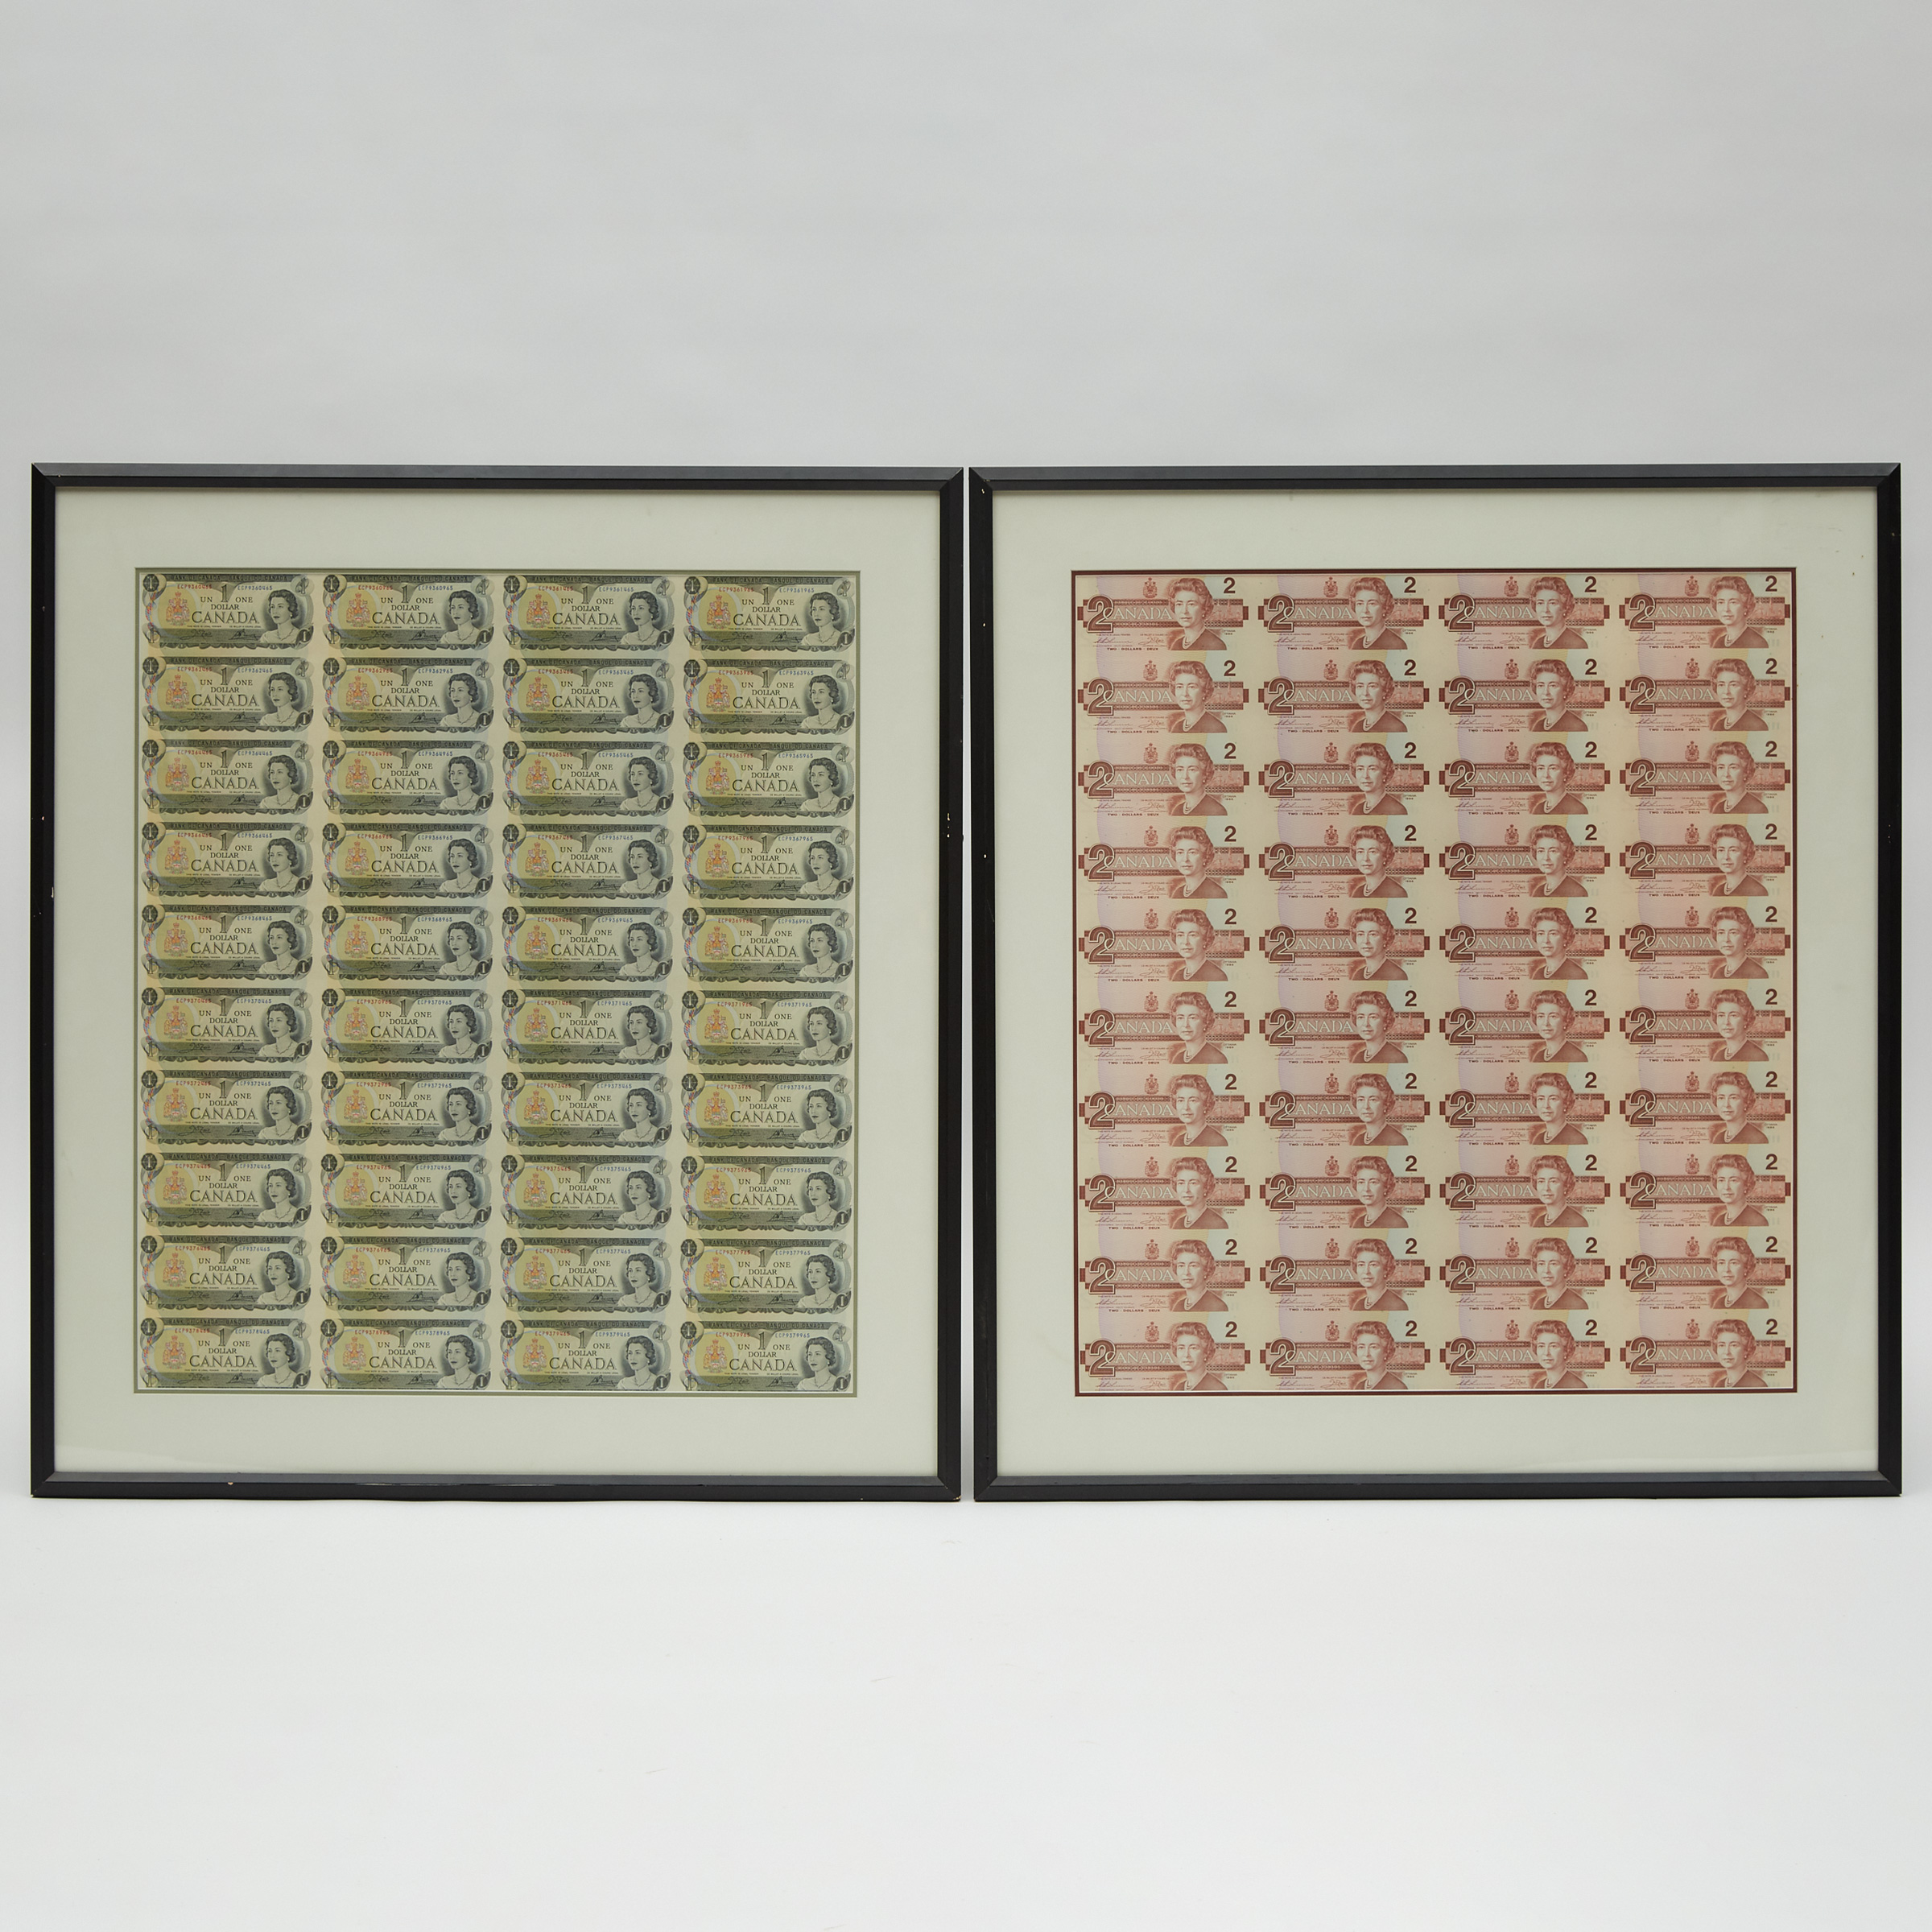 Uncut Canadian $1 (1973) and $2 (1986) Banknote Sheets